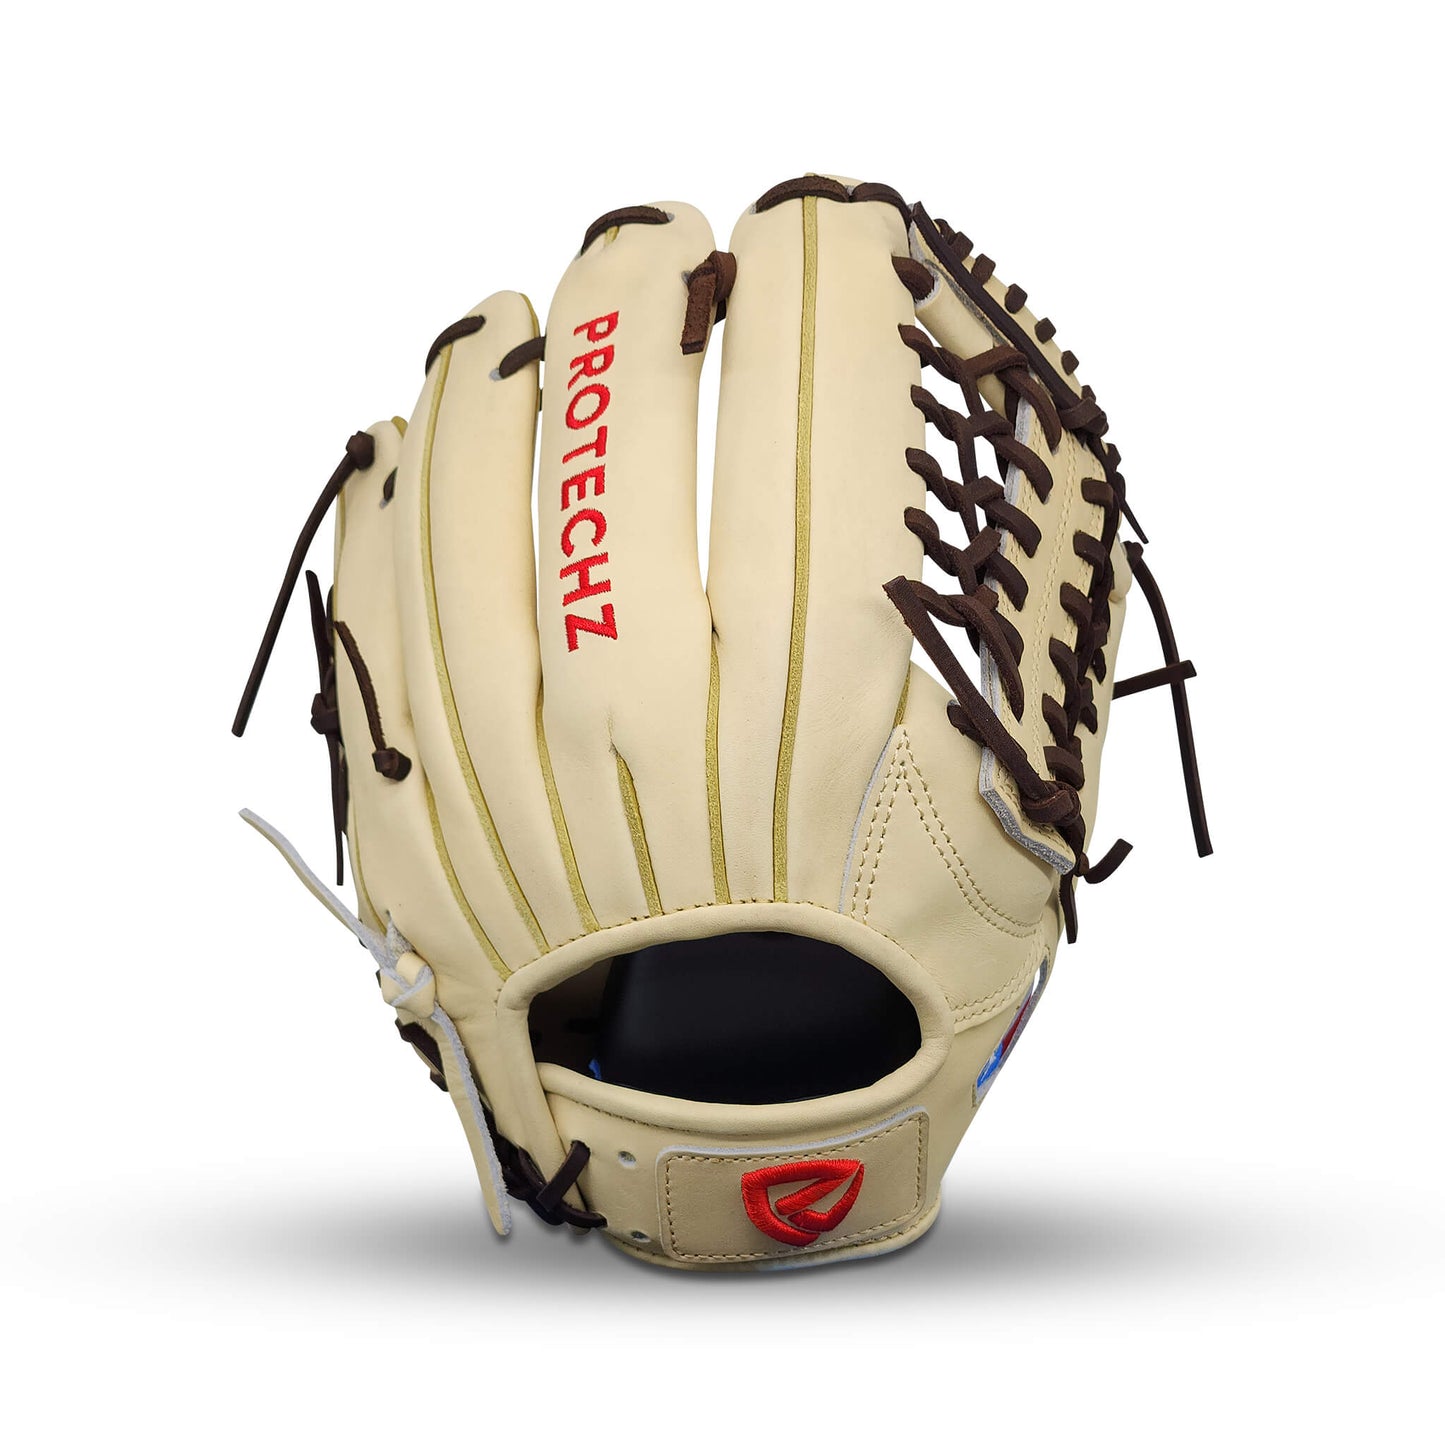 Titan Series Limited Edition 11.75” Infield Glove with T-Web, Camel Shell and Palm, Dark Brown Lacing, and Embroidered Texas Flag – RHT